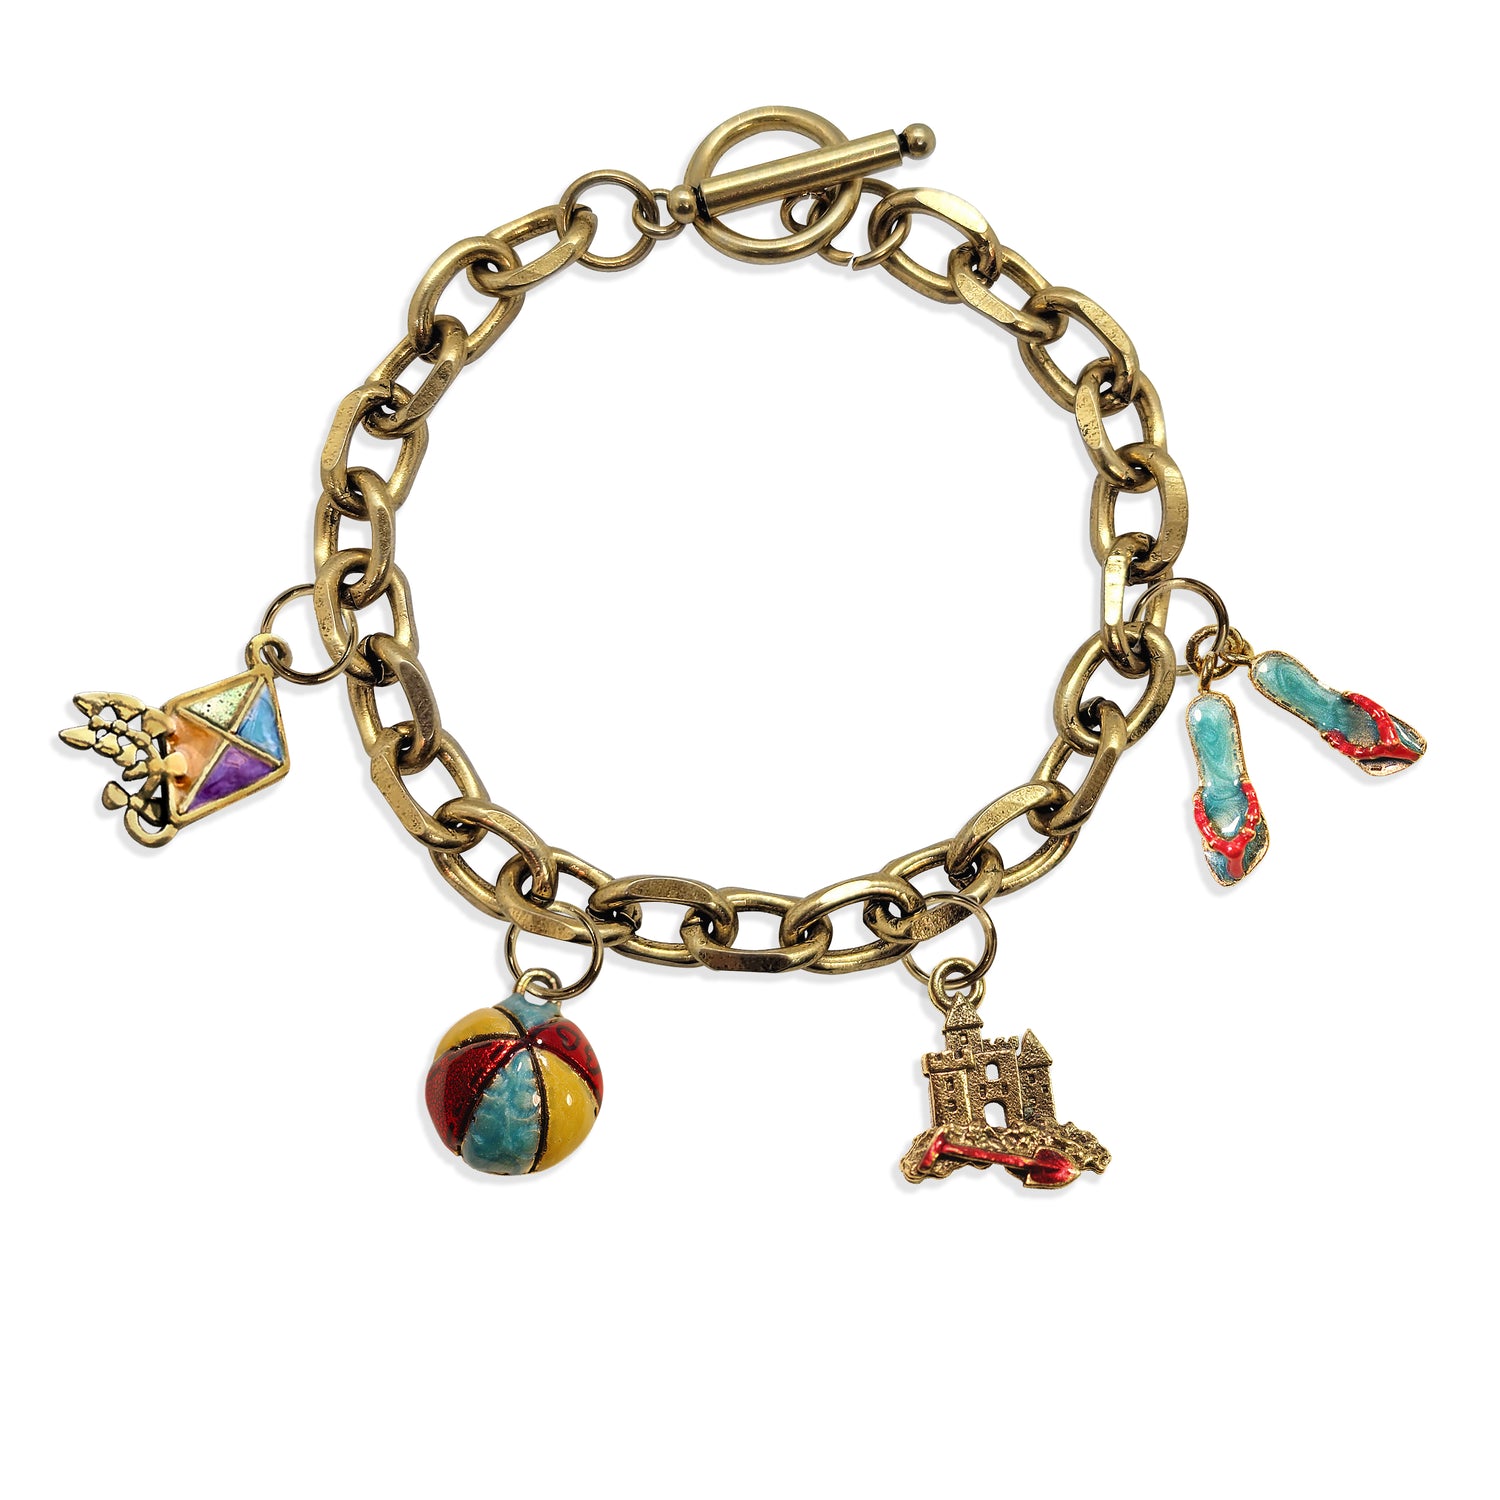 Whimsical Gifts | Beach Lover Toggle Charm Bracelet | 4 Handpainted Charms | Antique Gold or Antique Silver Finish in Antique Gold Finish | Holiday & Seasonal Themed | Spring & Summer Fun Jewelry